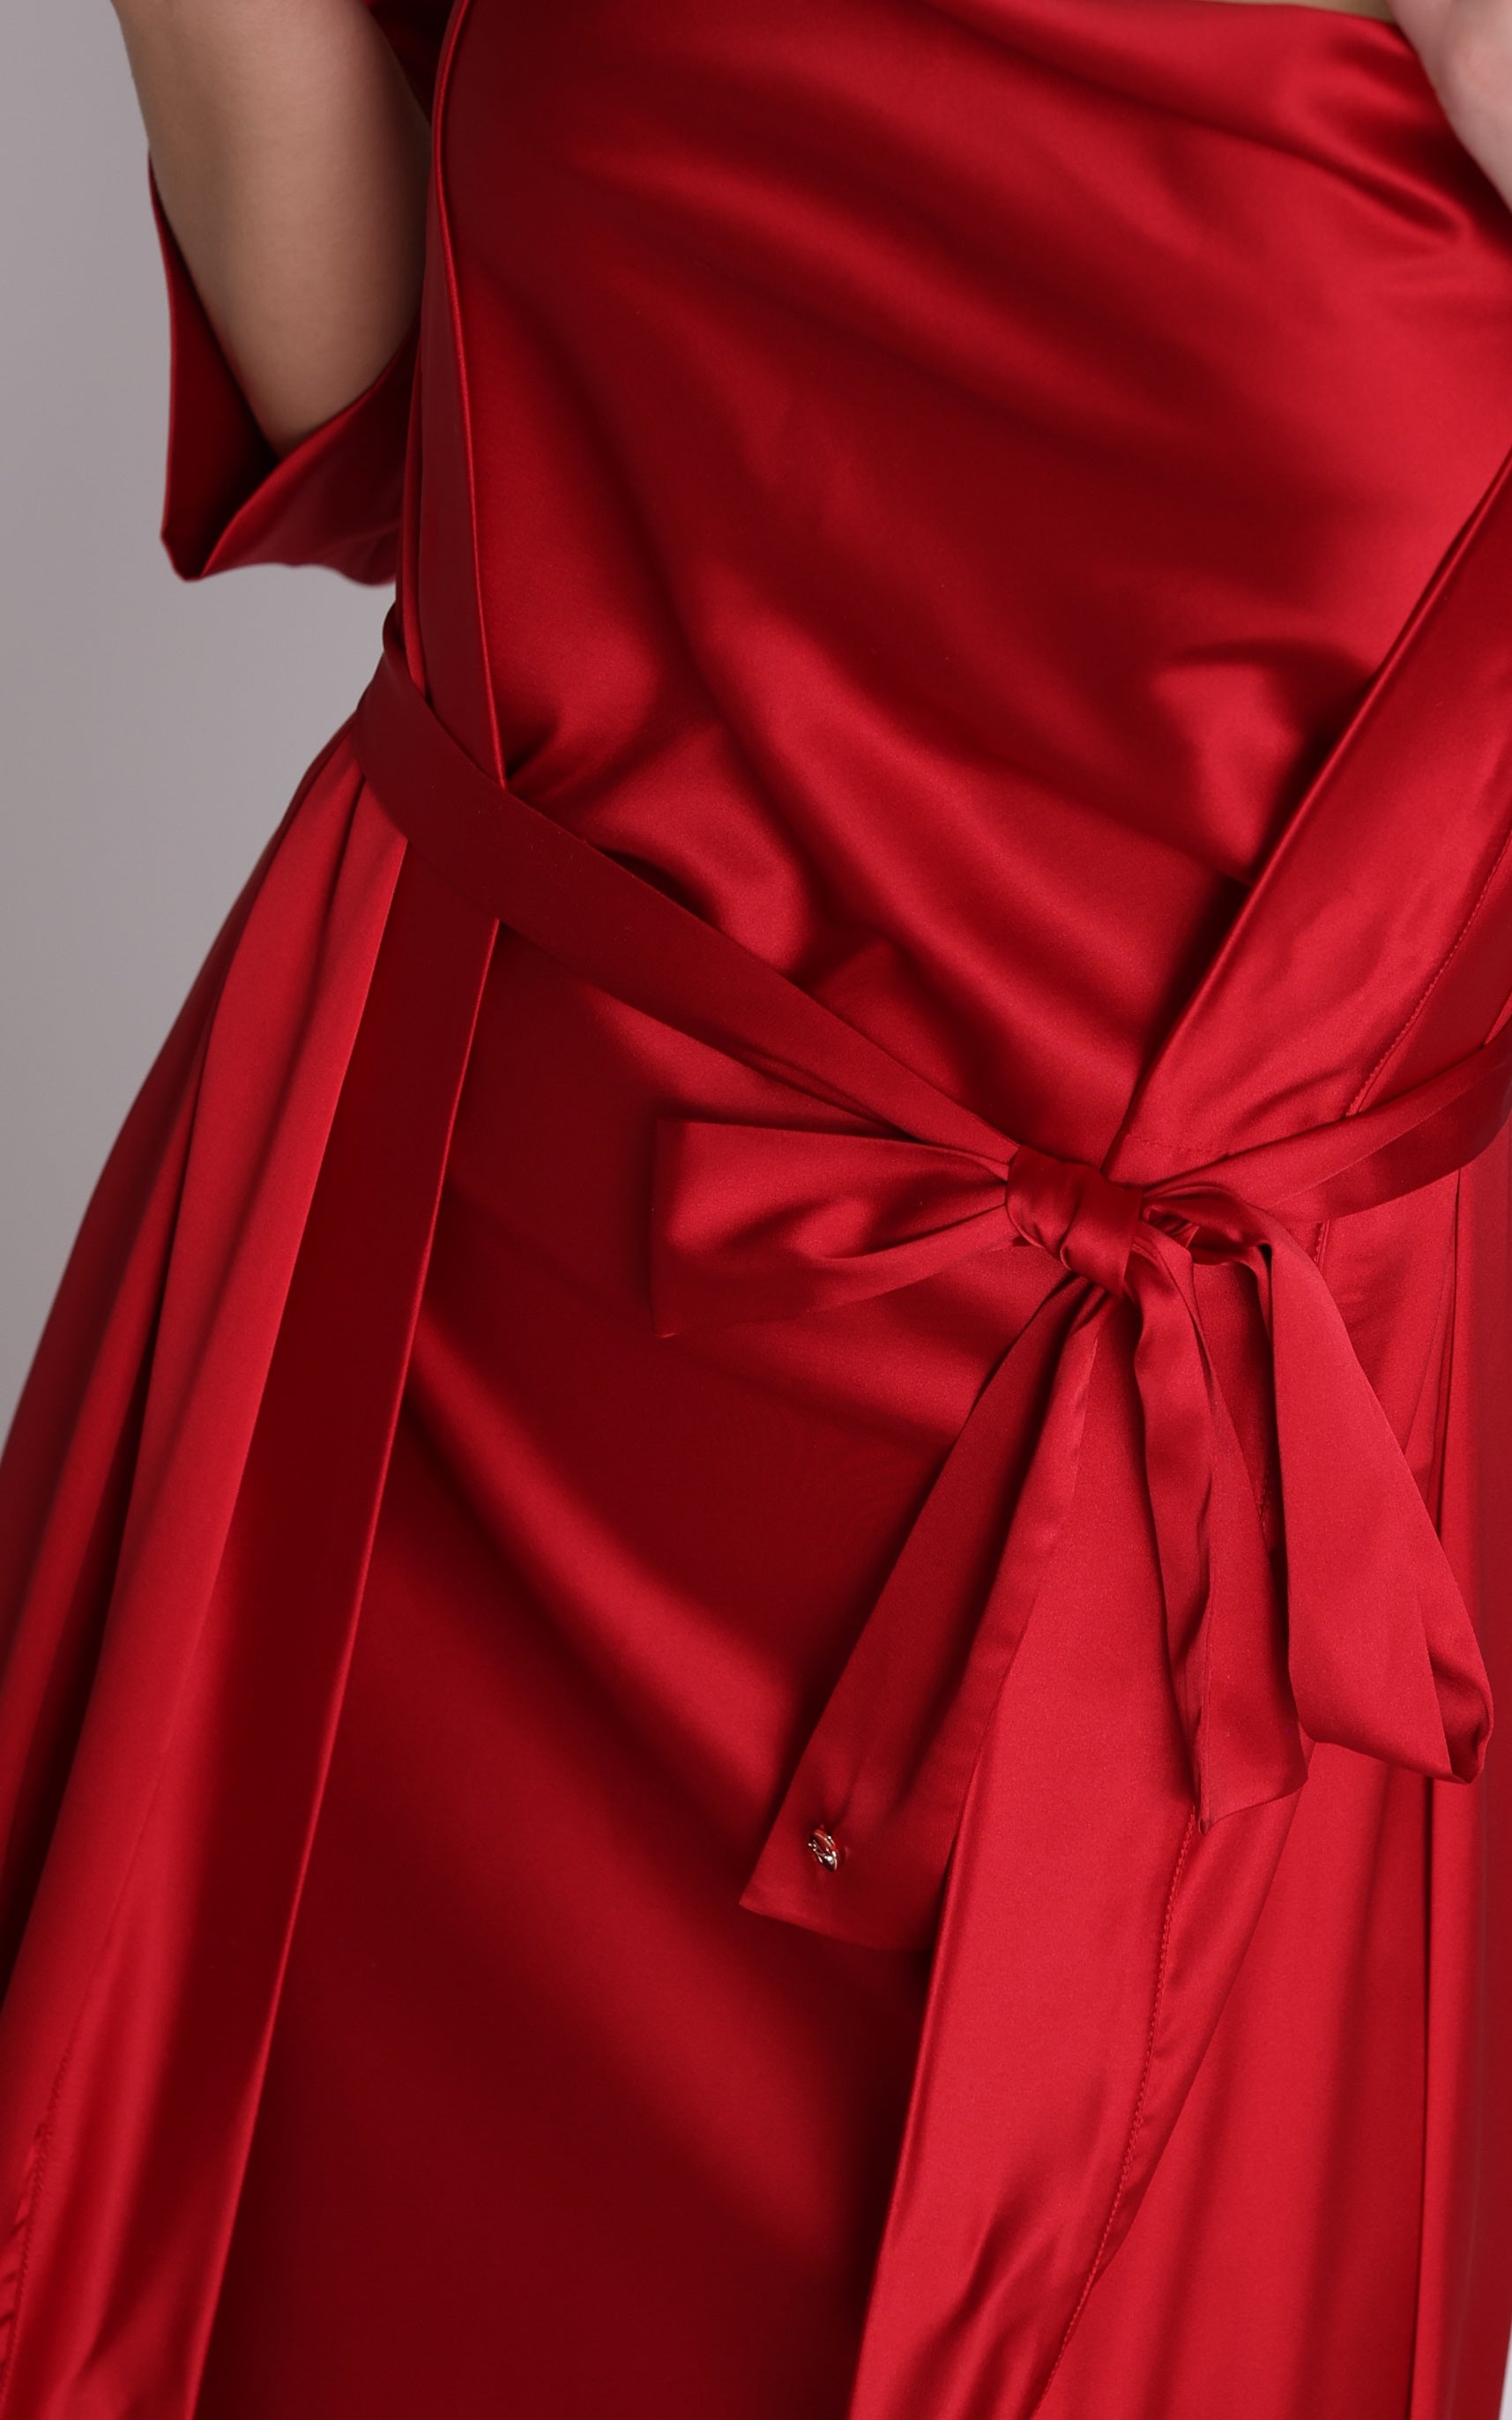 Long Red Satin Wave Robe.